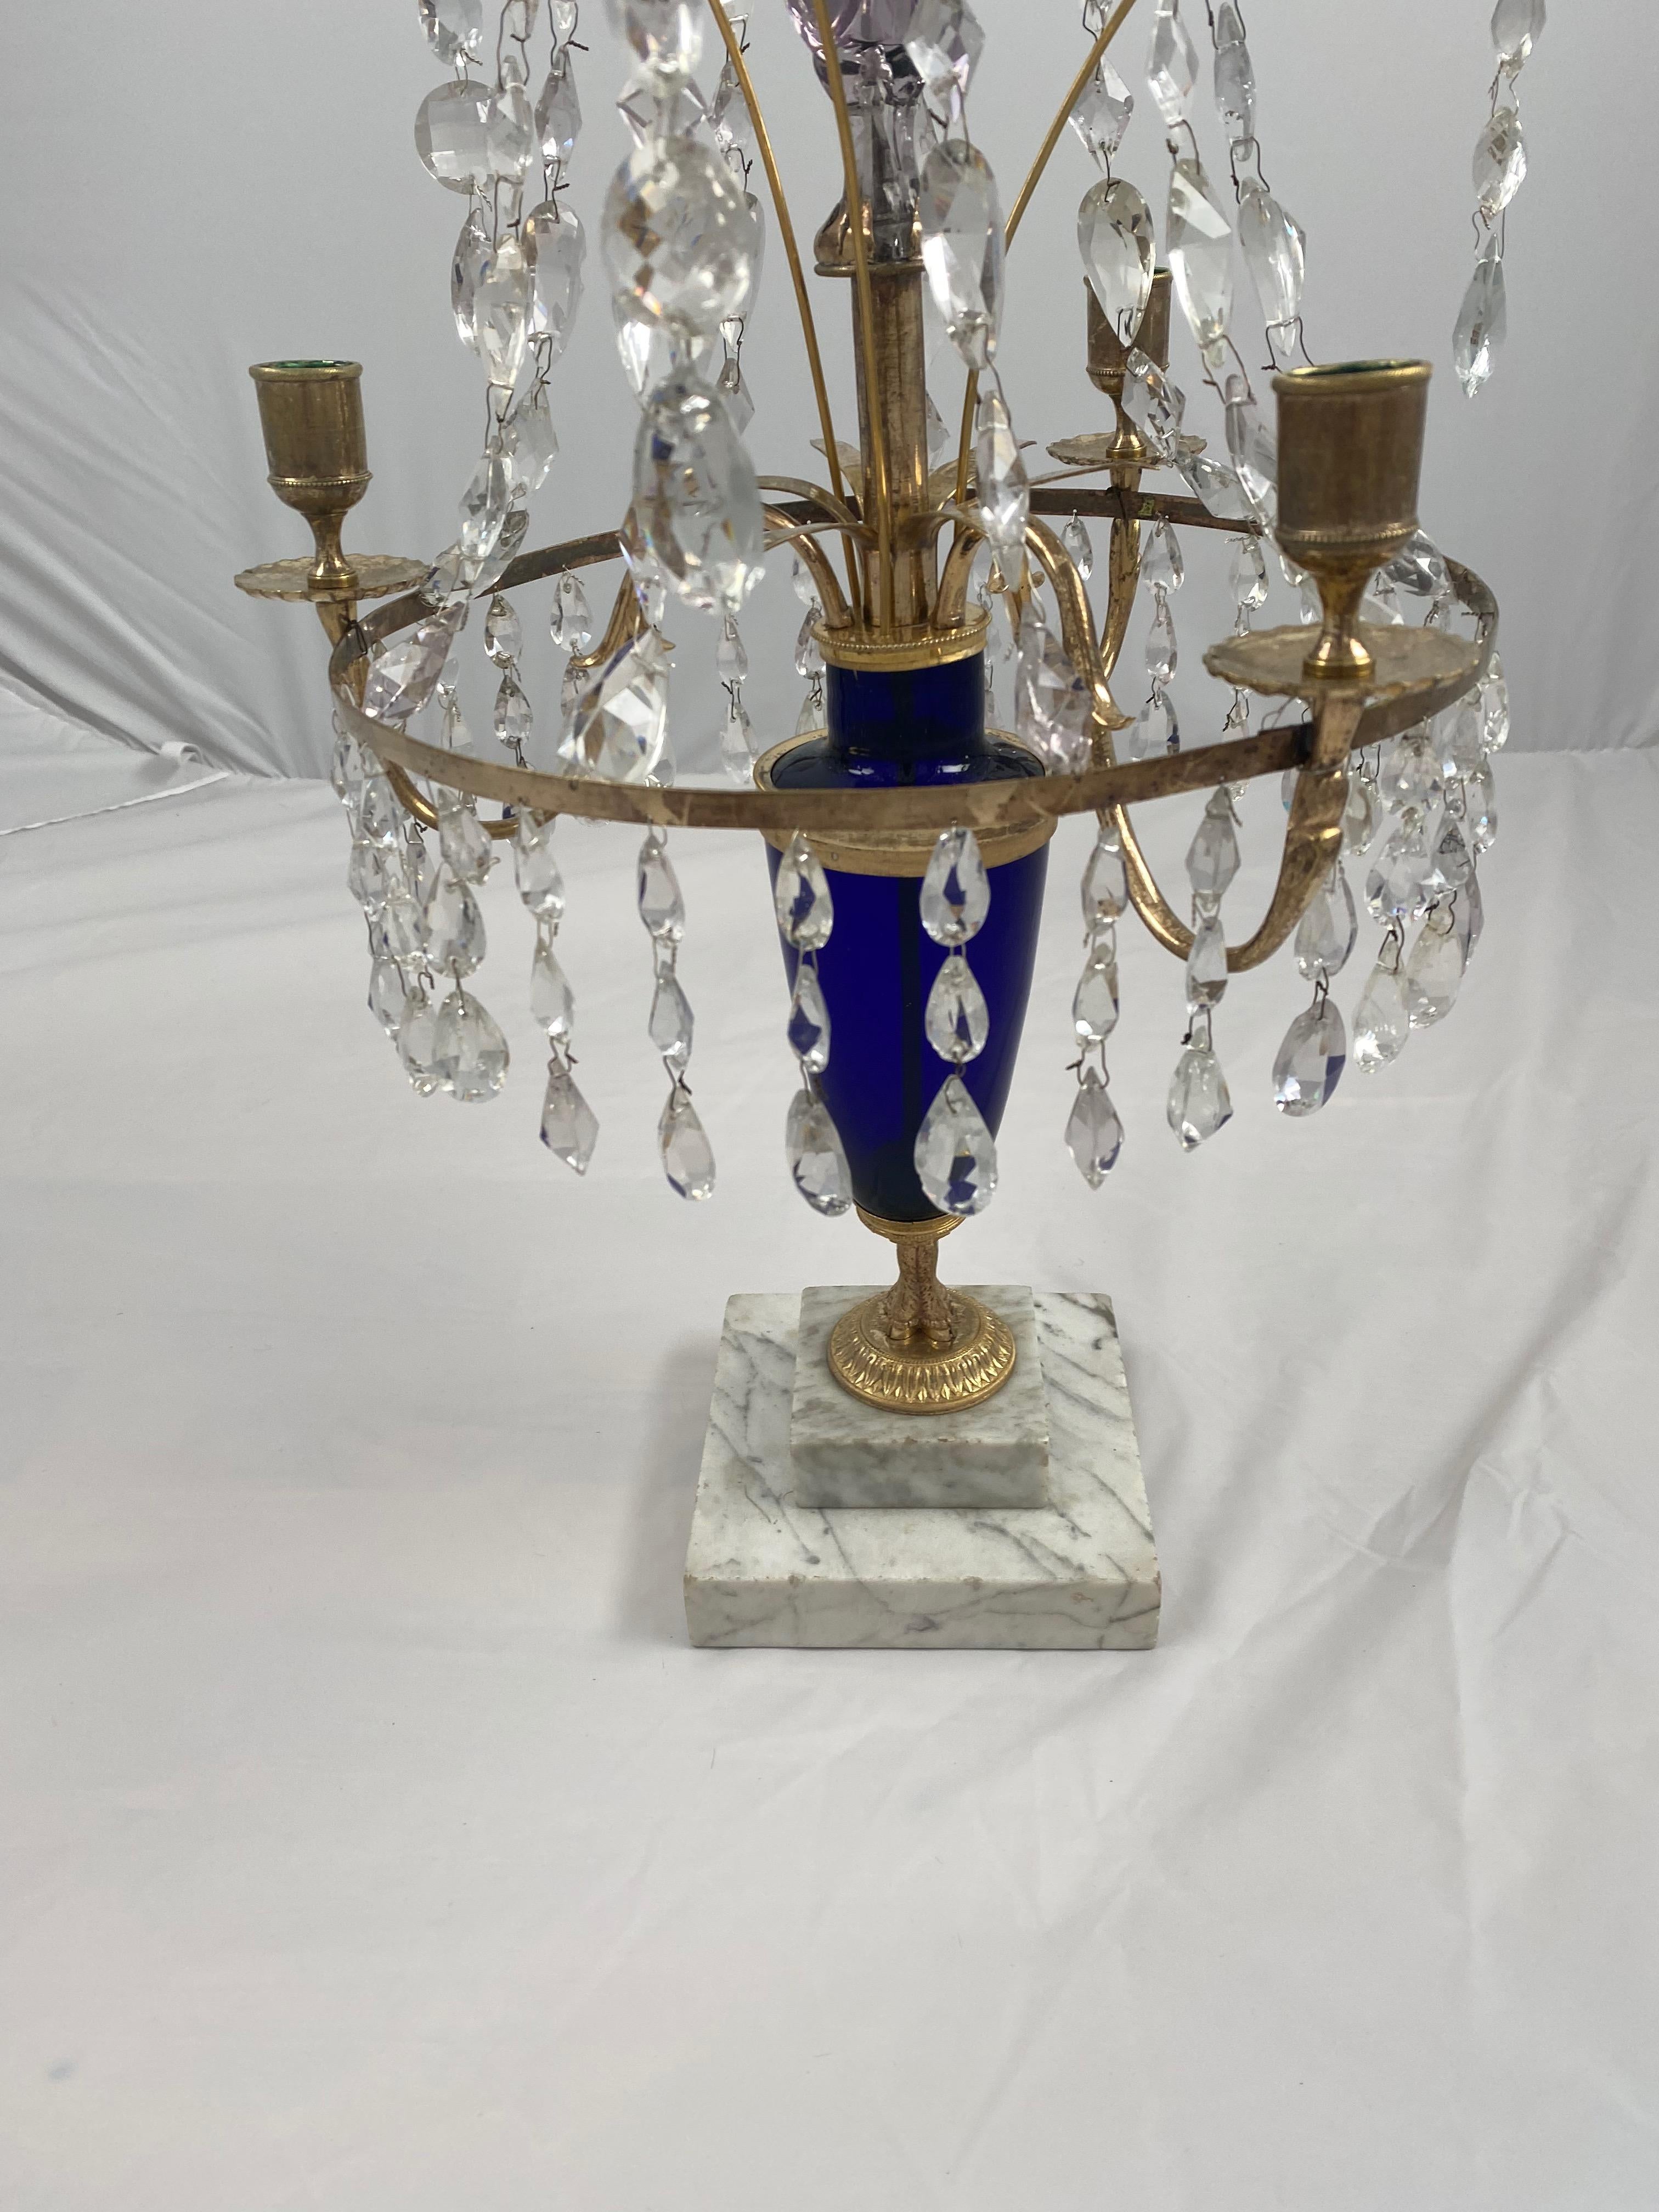 A Swedish crystal girandole made, circa 1790. A blown Cobol blue glass urn holds three gilt bronze arms and a cut crystal spear. The base is made of Carrara marble. Great condition.